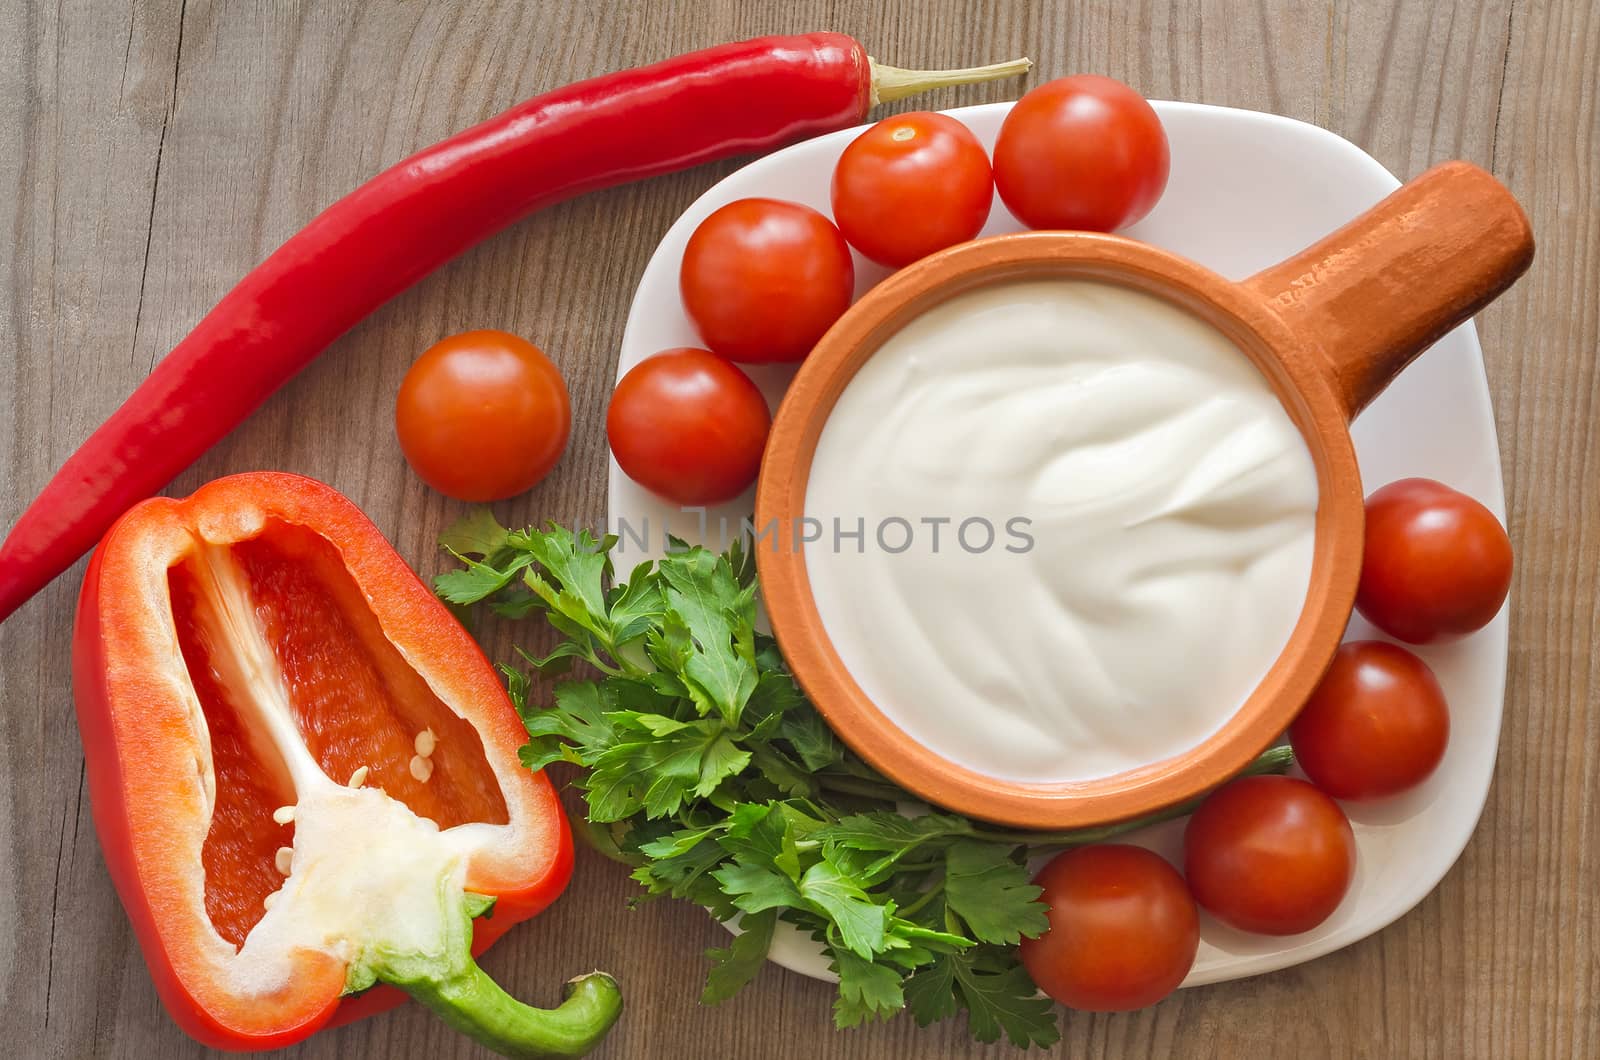 Ceramic dishes with sour cream, and ingredients for salad on an old wooden table.